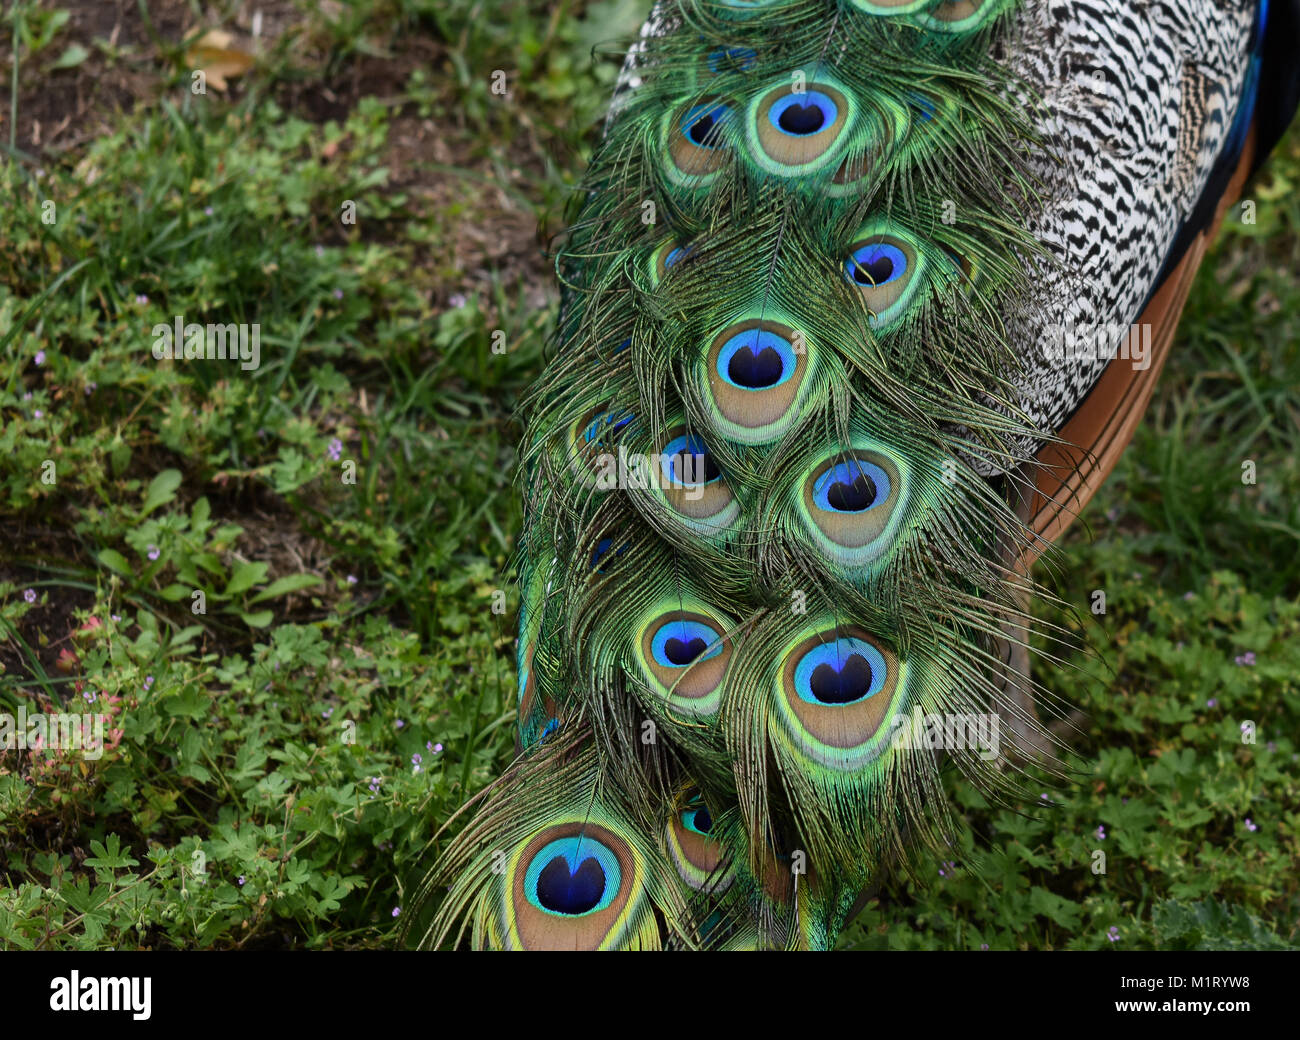 peacock feathers Stock Photo